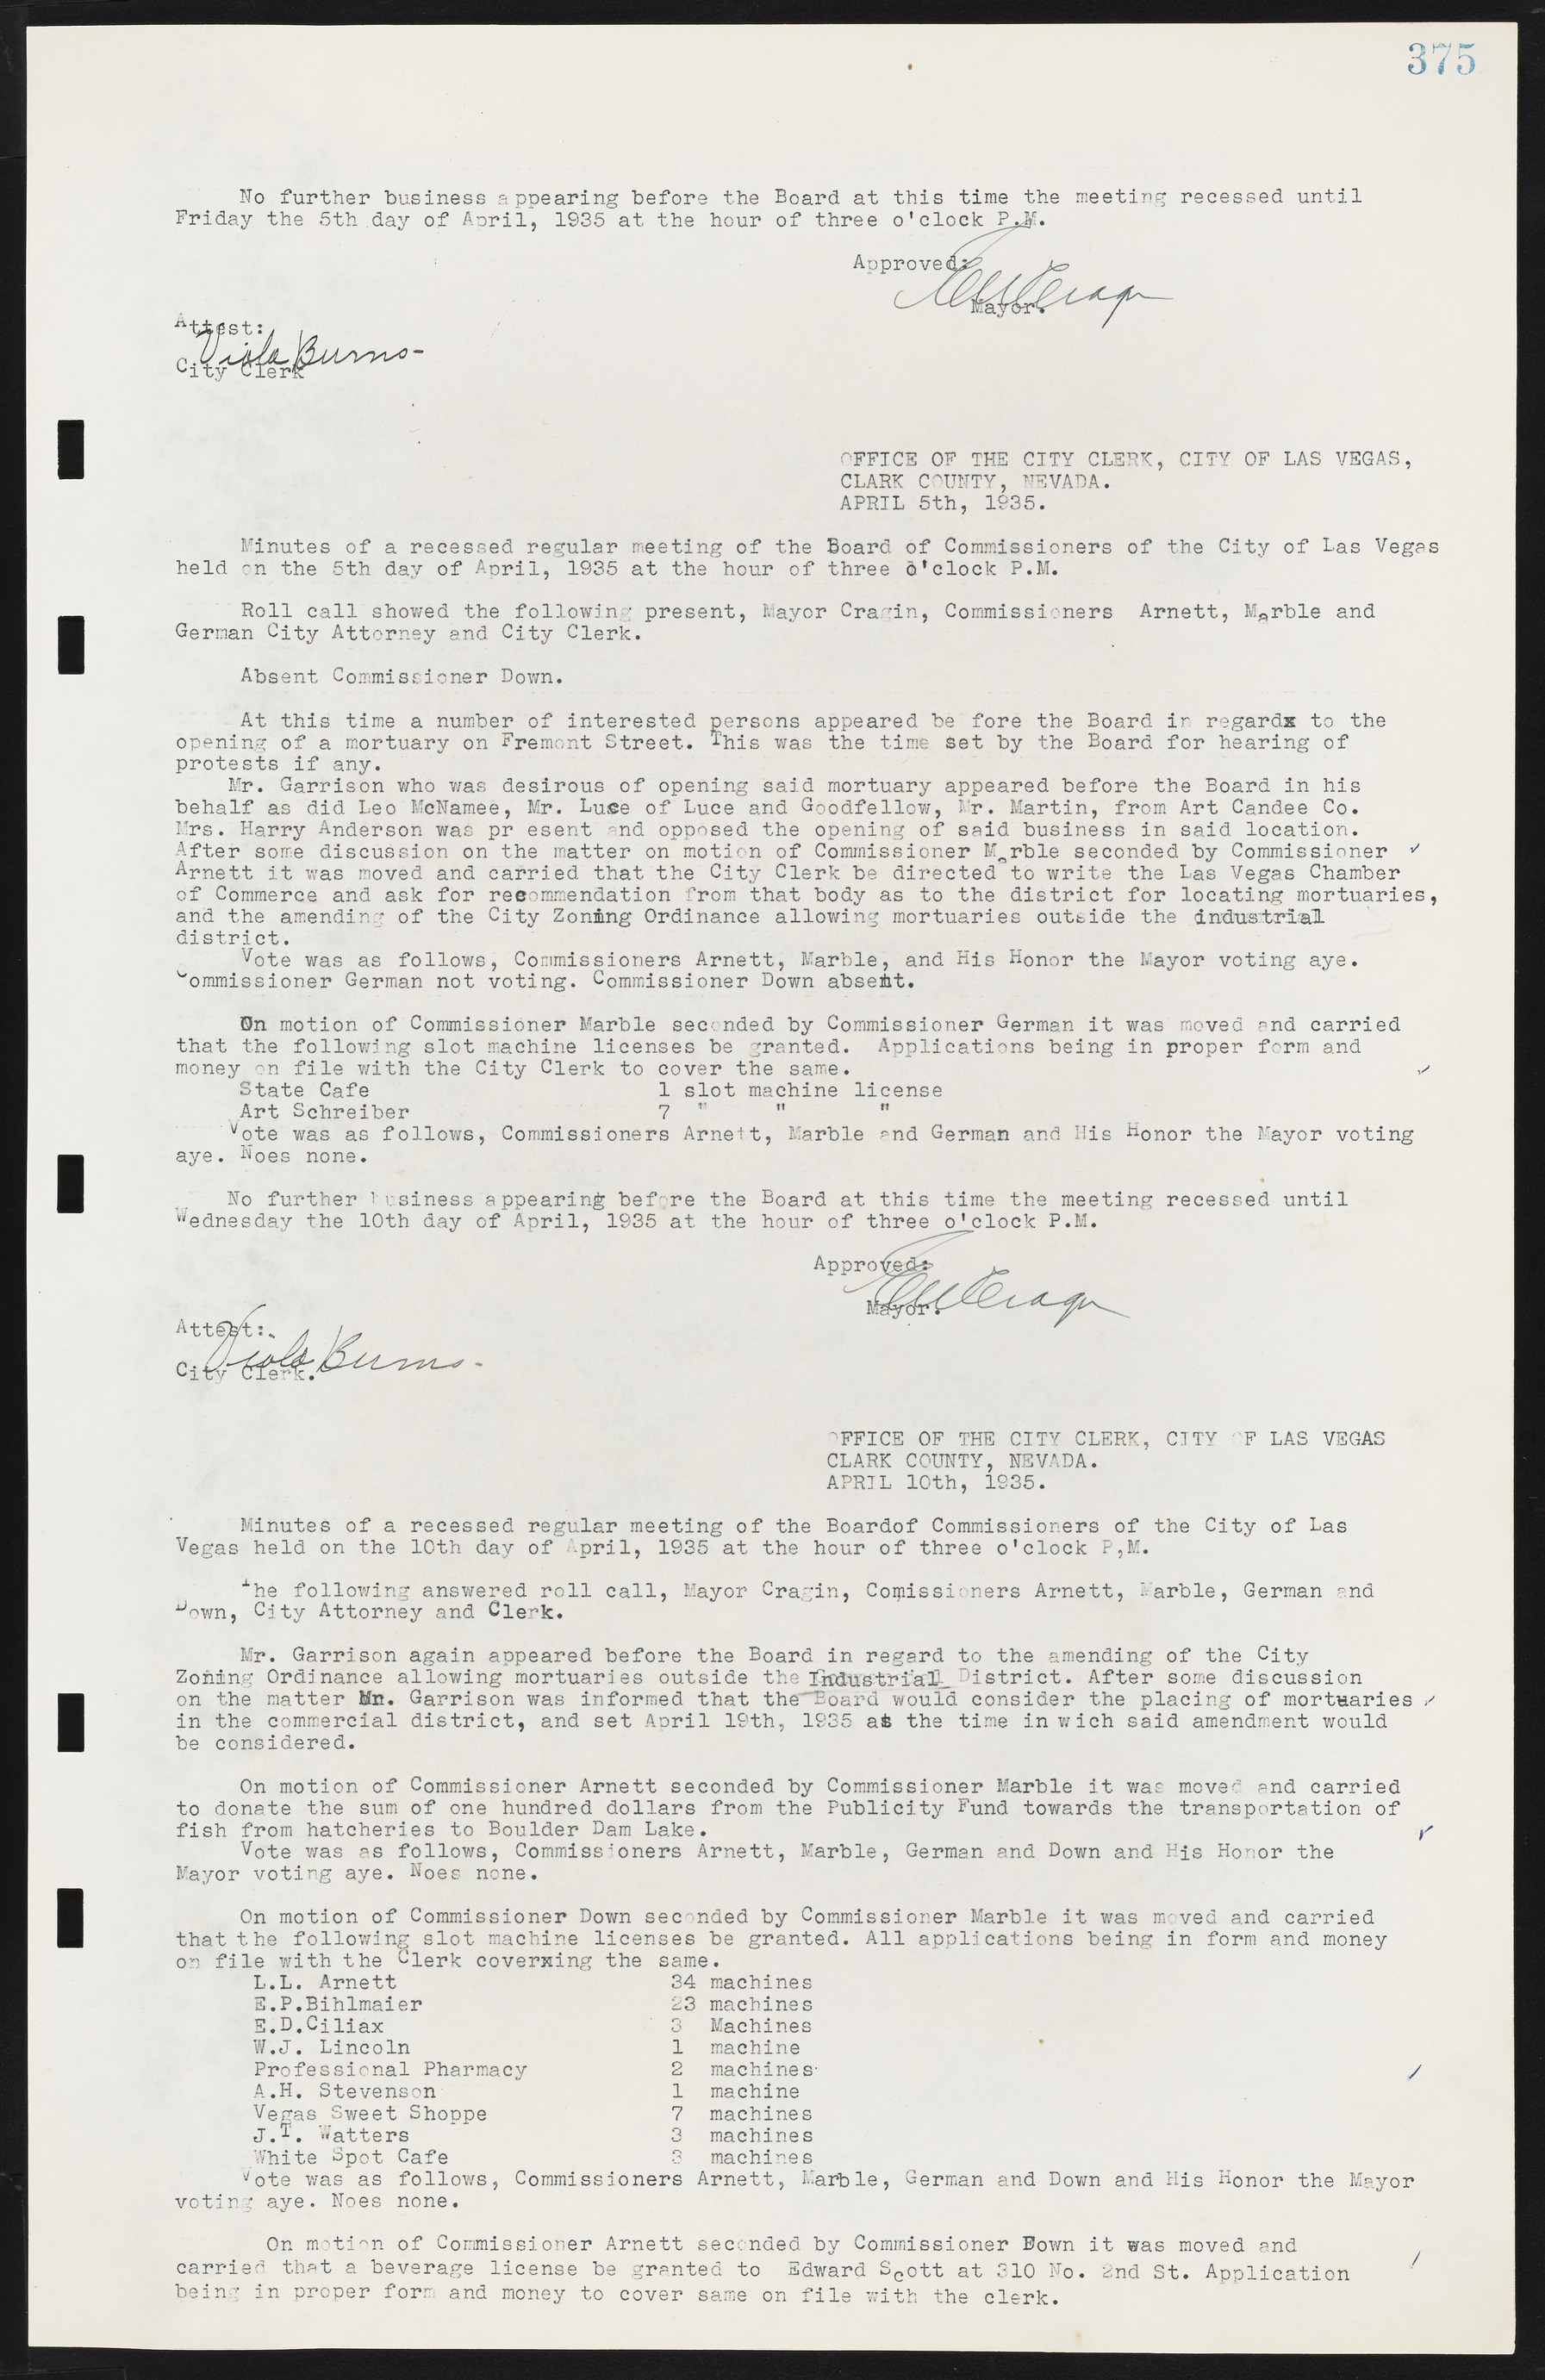 Las Vegas City Commission Minutes, May 14, 1929 to February 11, 1937, lvc000003-382